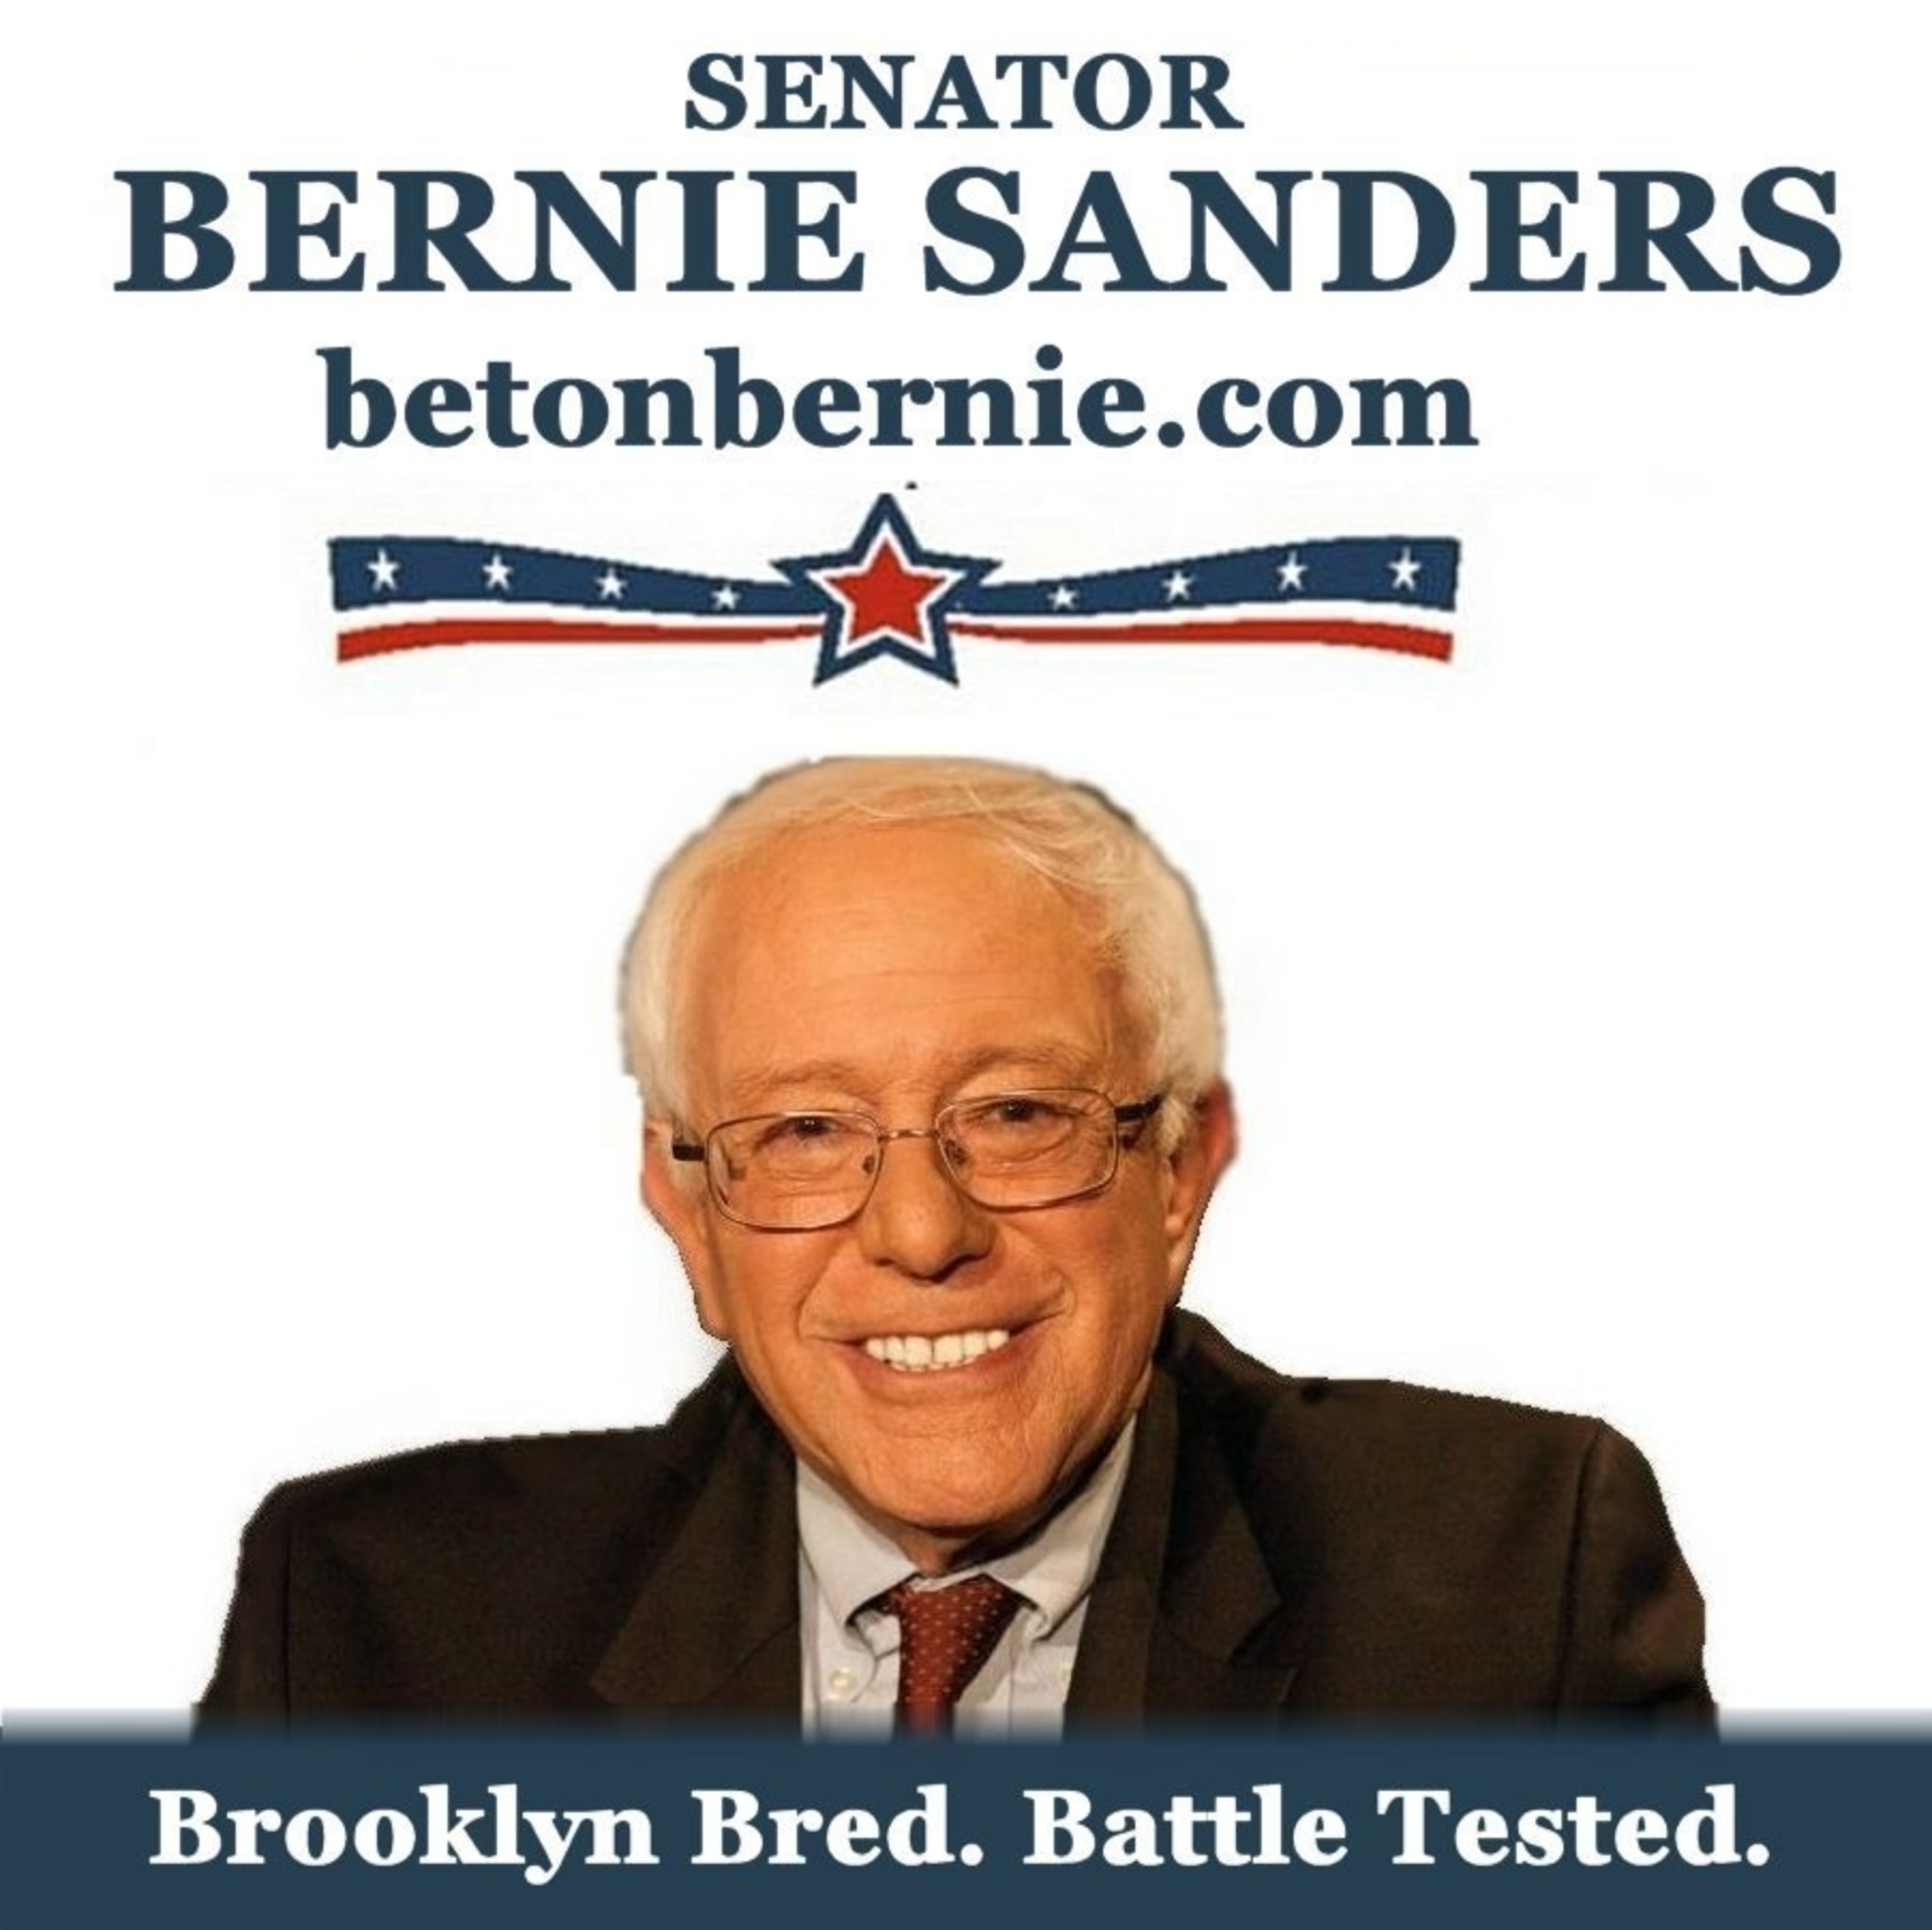 BETONBERNIE.COM: Sen. Bernie Sanders for president. Born & bred in Brooklyn. 30+ years in Congress, not a flaw. The world is ours. GO VOTE!